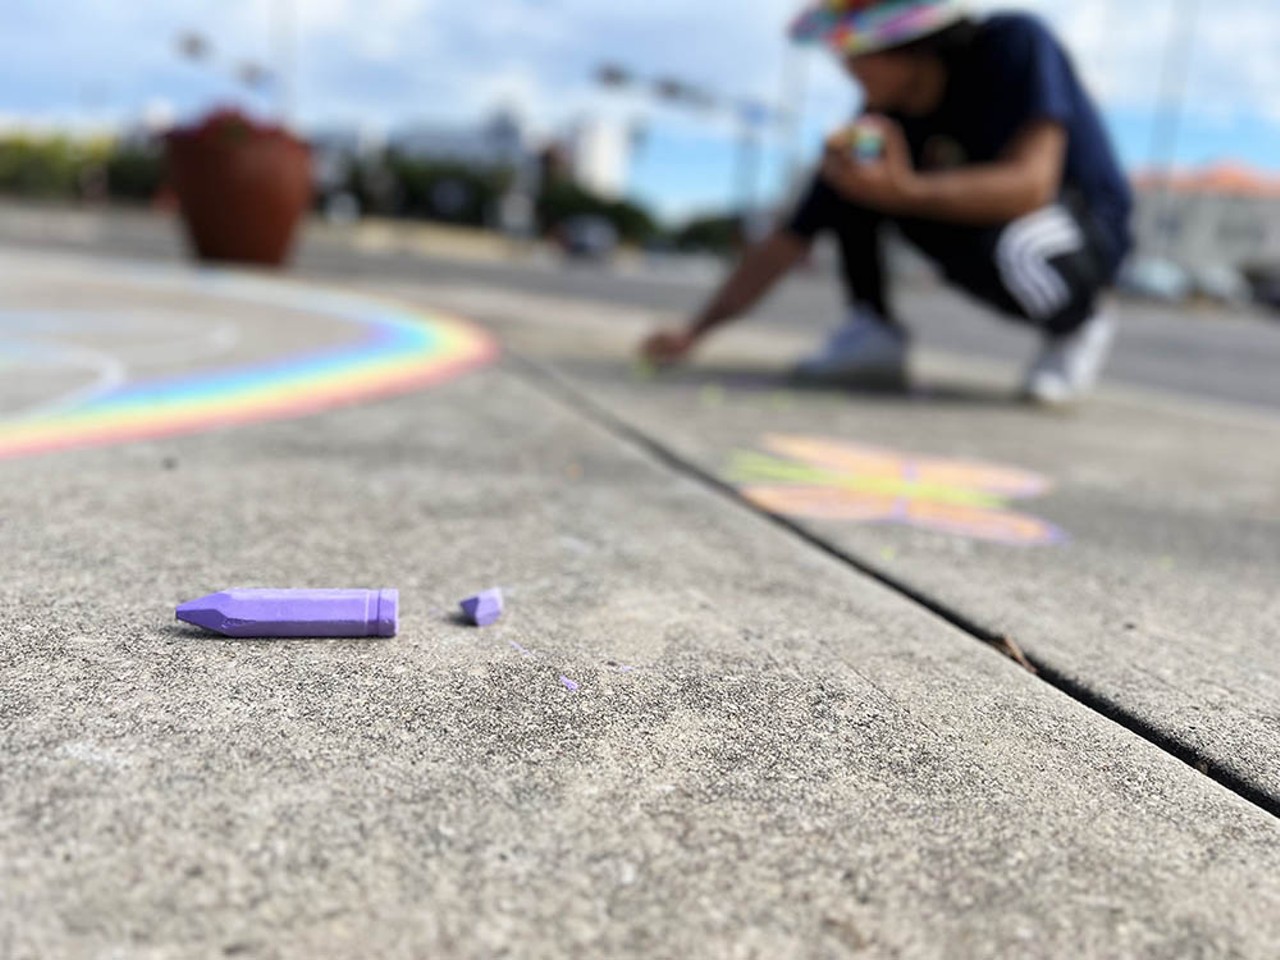 Everything we saw at San Antonio's chalk art memorial for the Uvalde shooting victims